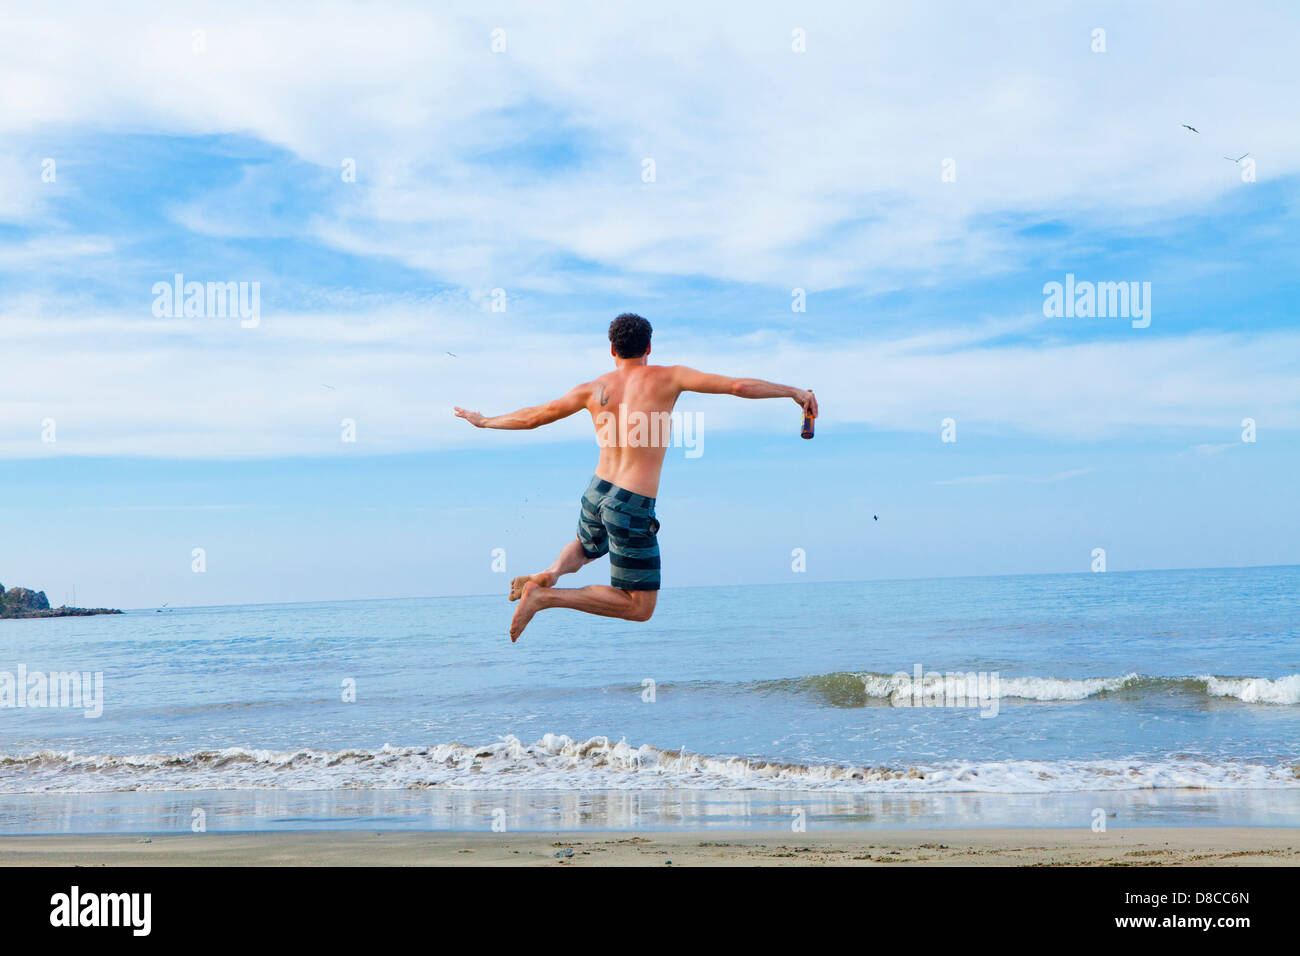 Man leaping in air on beach Stock Photo